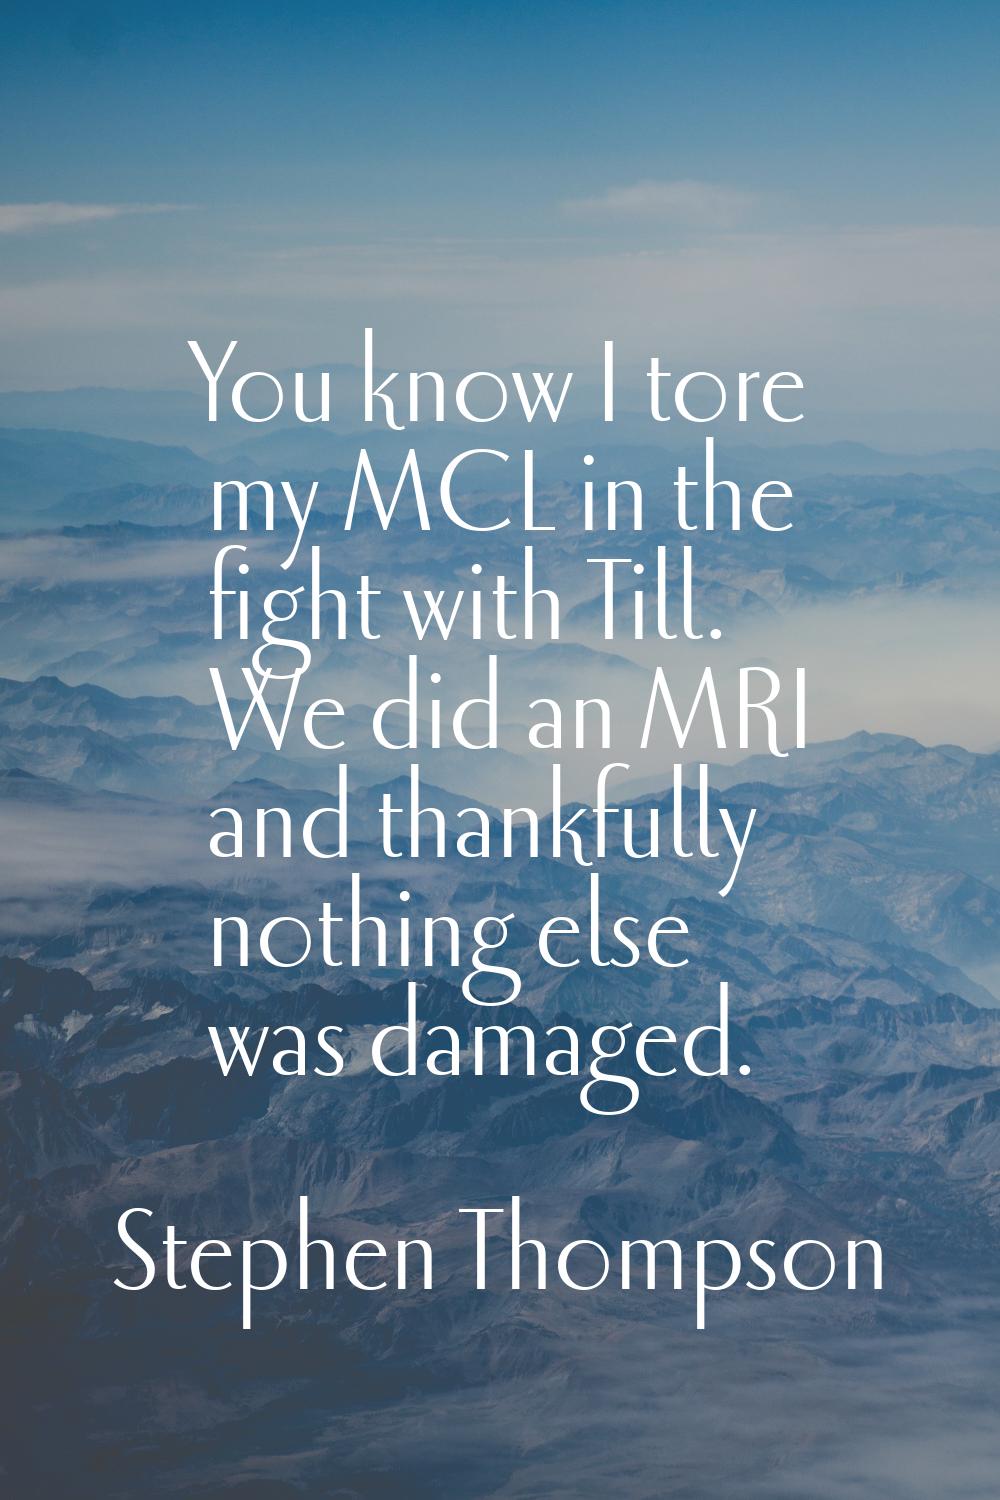 You know I tore my MCL in the fight with Till. We did an MRI and thankfully nothing else was damage